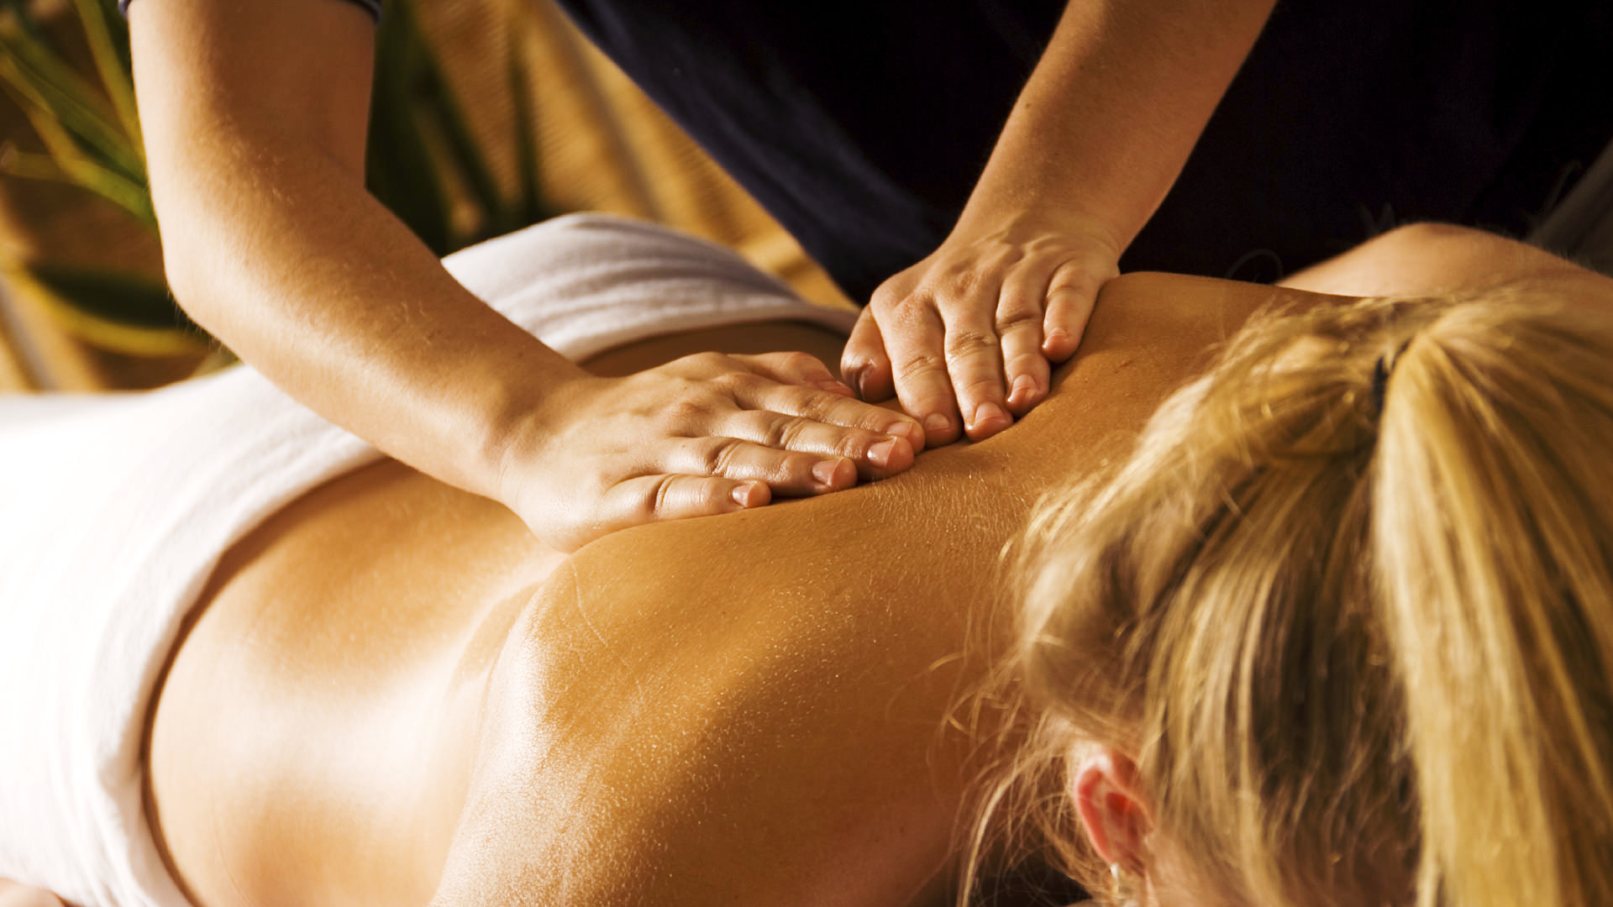 What is a chiropractic massage